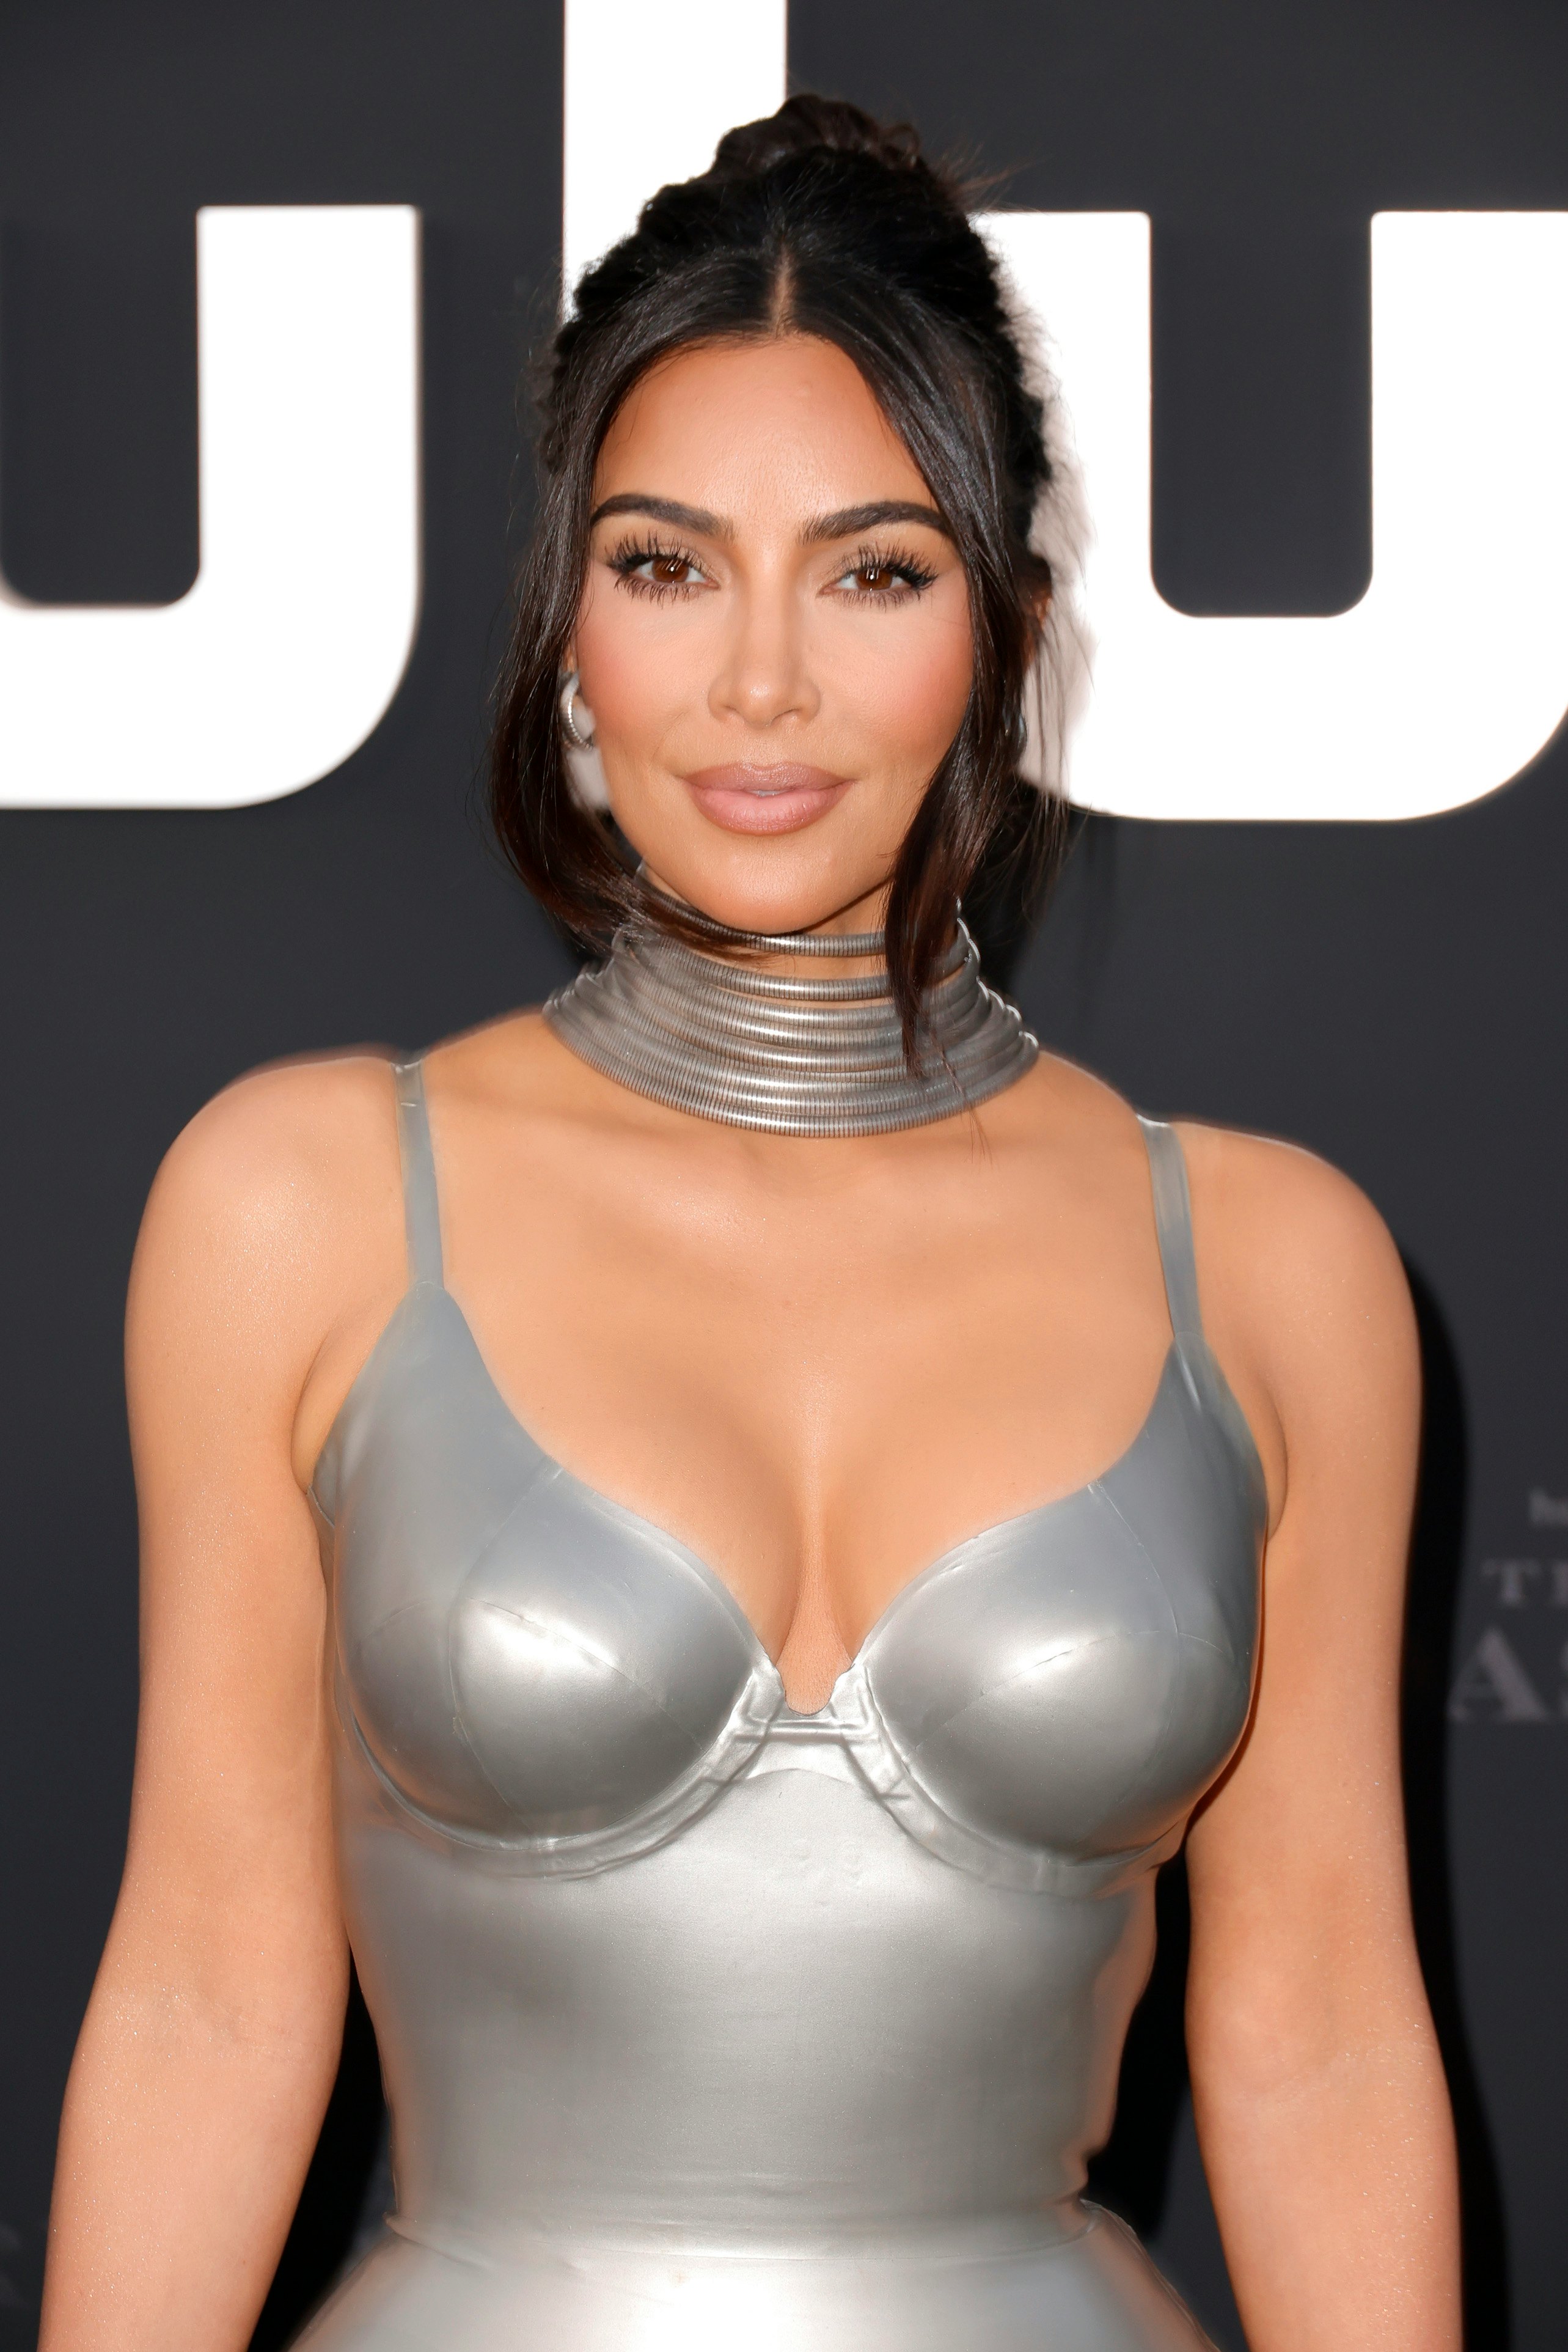 Kim Kardashian steps out in skintight silver outfit for a night